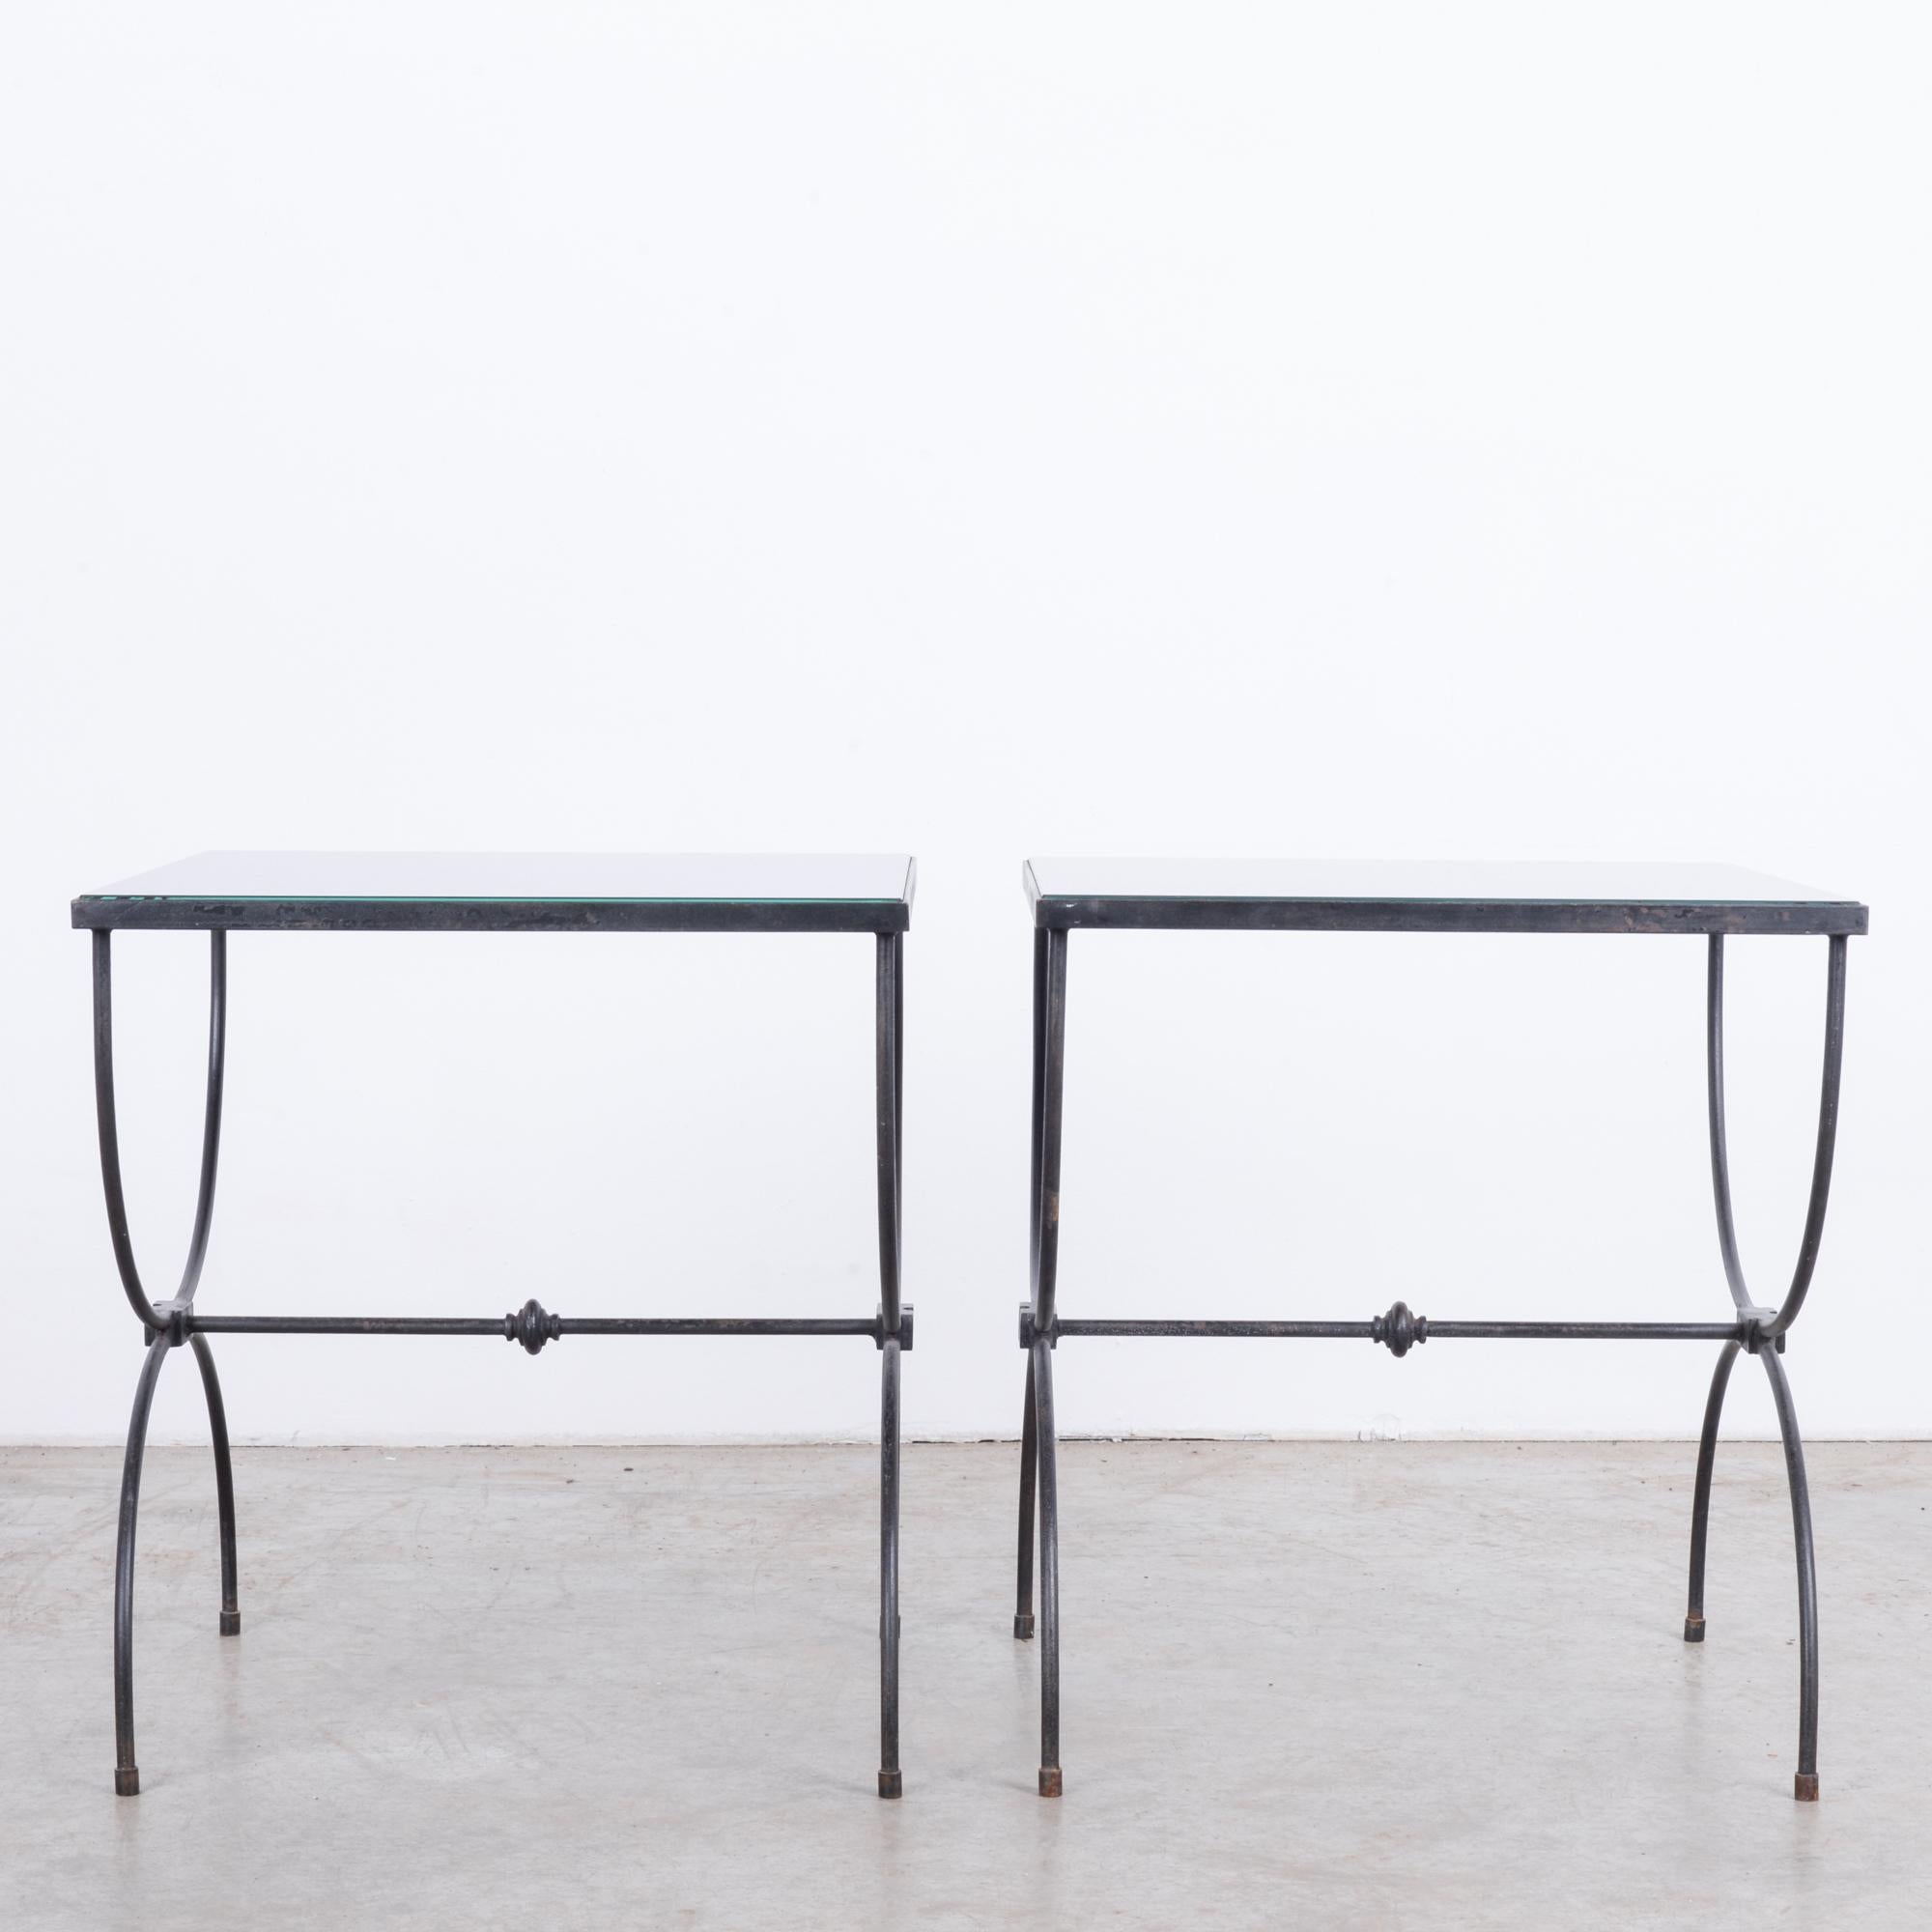 This pair of coffee tables was made in Belgium, circa 1960. Characteristic of midcentury design, the tables combine materials to feature a rectangular, opaque glass set in a metal frame. The black frames are constructed with semi-circular tubes on